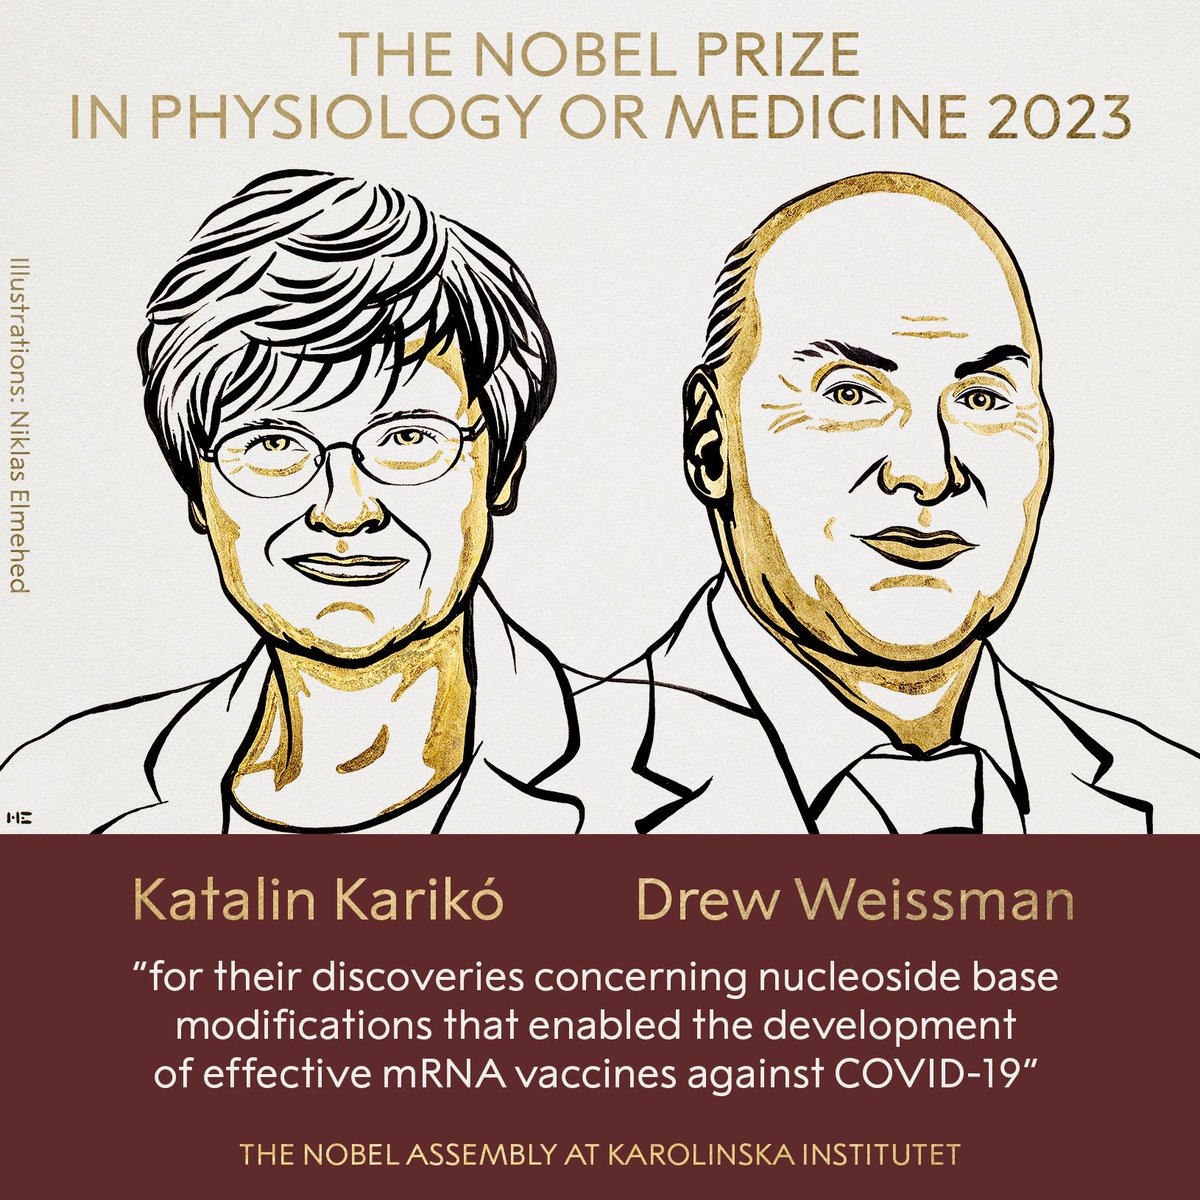 The 2023 #NobelPrize in Physiology or #Medicine has been awarded to #KatalinKariko and #DrewWeissman for their discoveries concerning nucleoside base modifications that enabled the development of effective #mRNA vaccines against #COVID19.

#NobelPrize2023 #Physiology